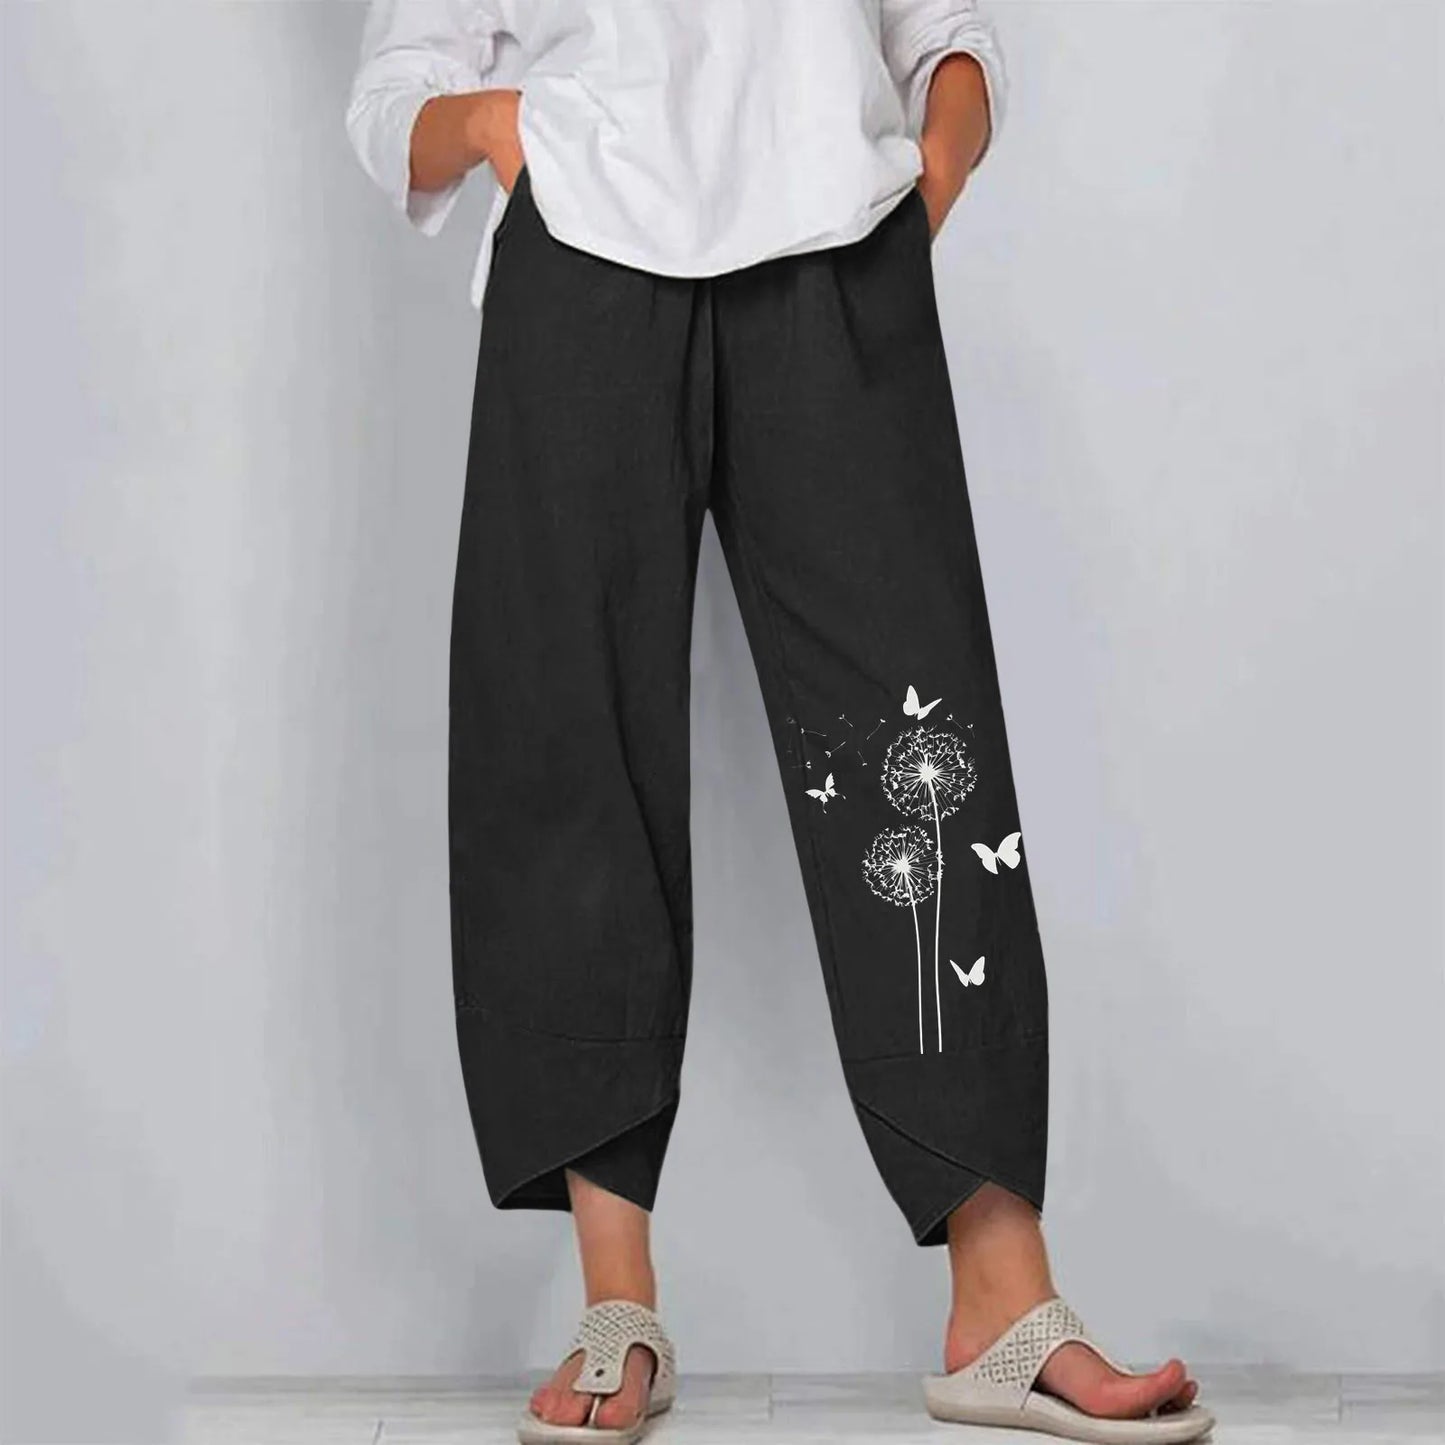 Capri Pants With Pockets and Wide Leg